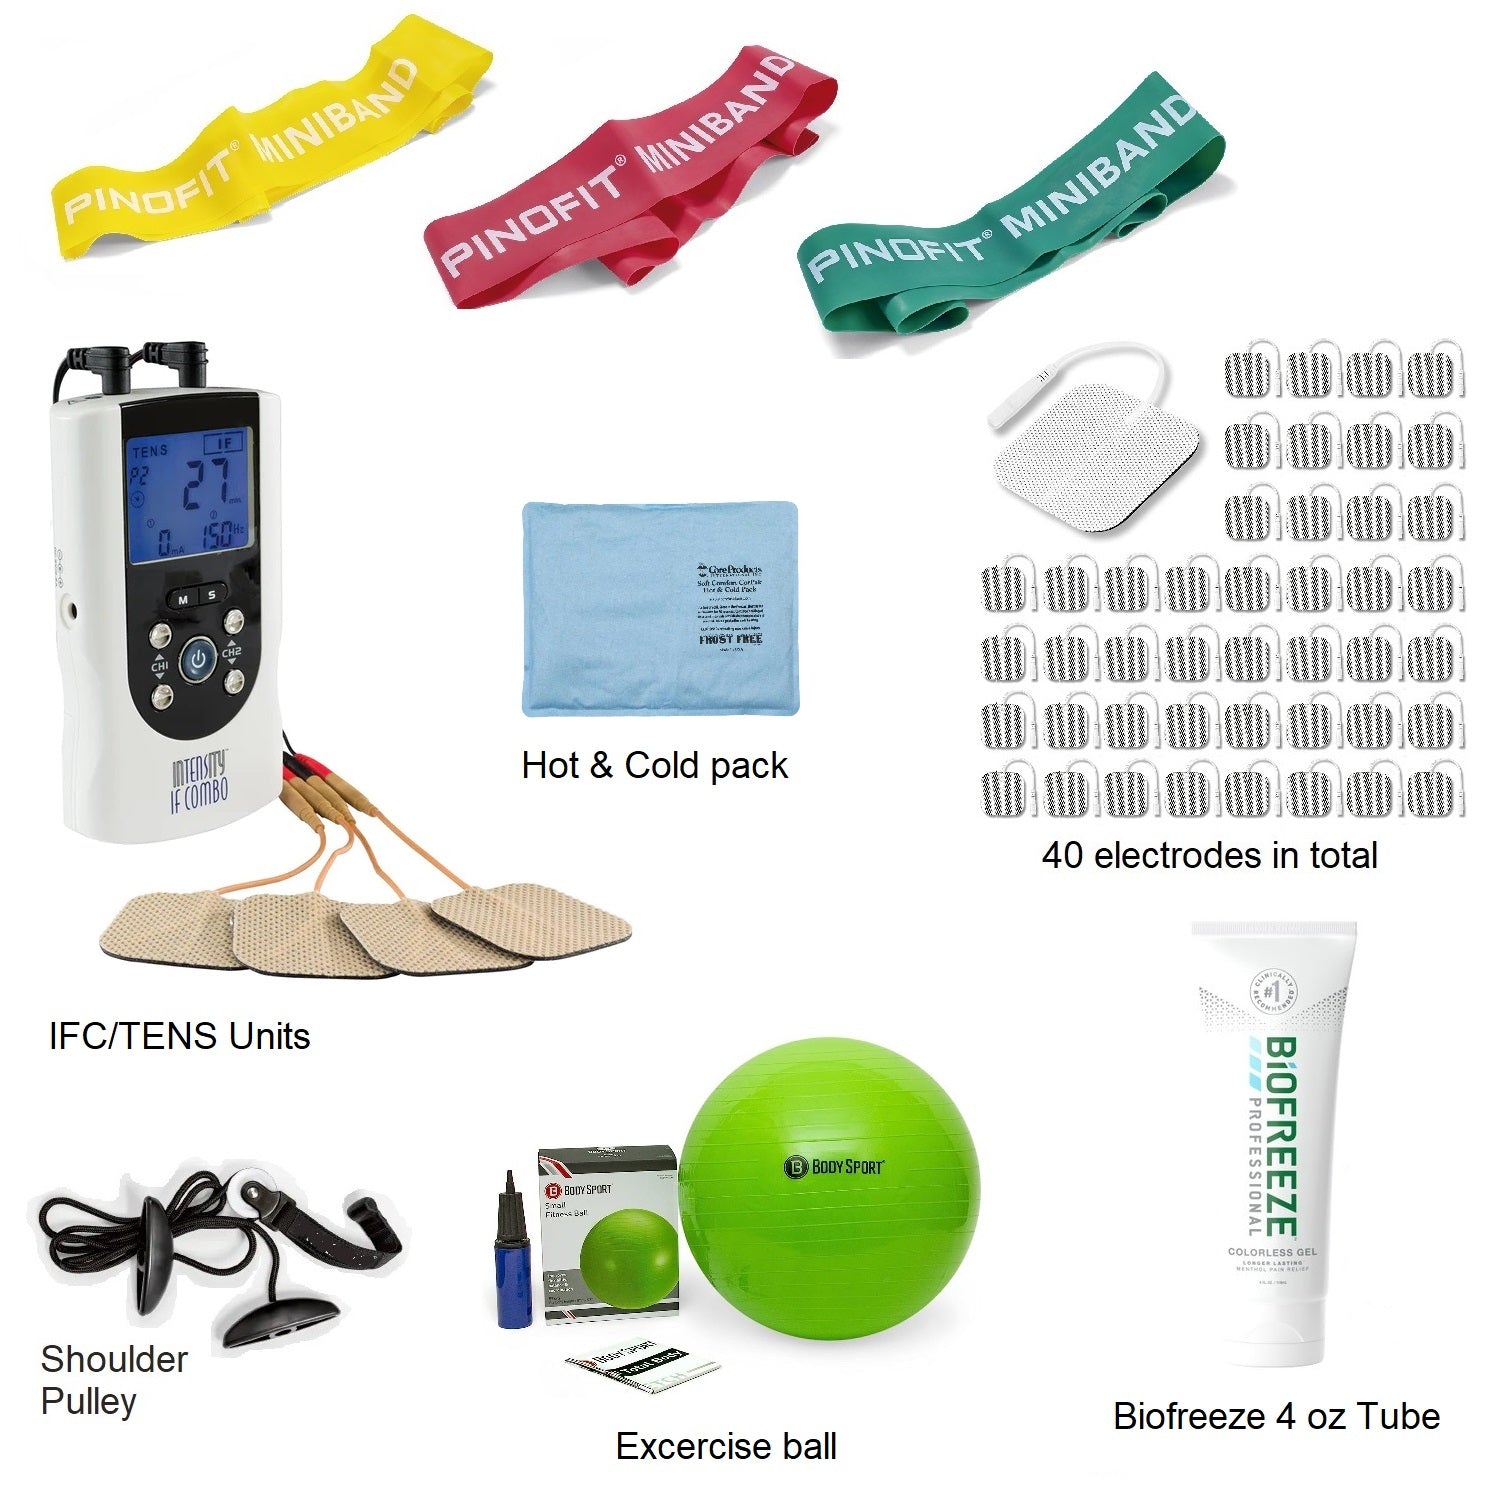 TENS 7000 ( renamed INTENSITY 7) – Physio supplies canada